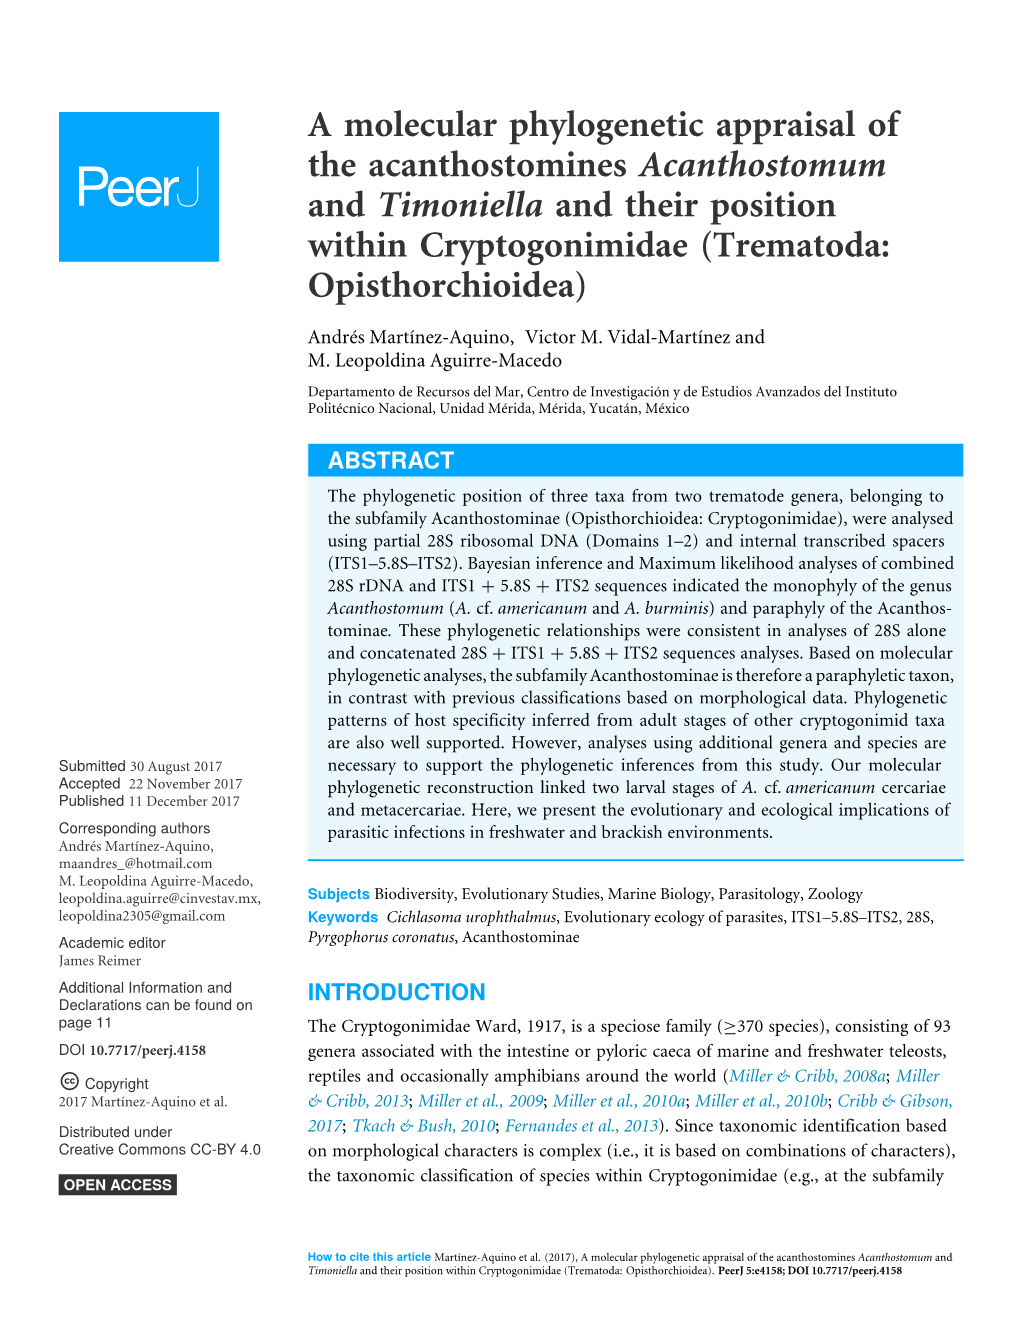 A Molecular Phylogenetic Appraisal of the Acanthostomines Acanthostomum and Timoniella and Their Position Within Cryptogonimidae (Trematoda: Opisthorchioidea)